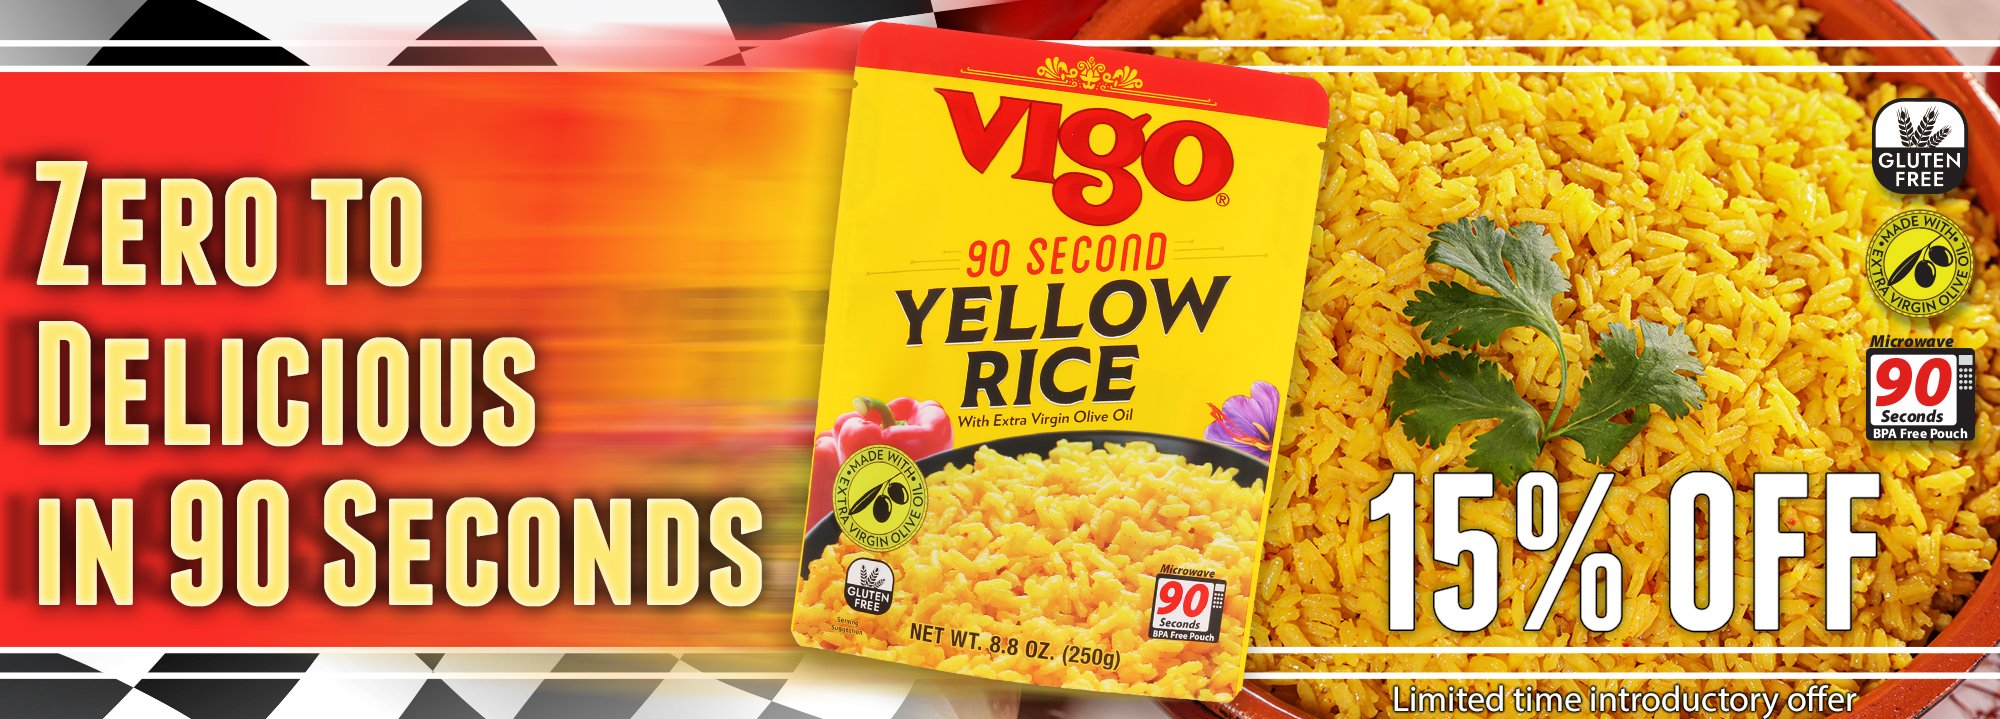 90 Second Yellow Rice 15% off promo